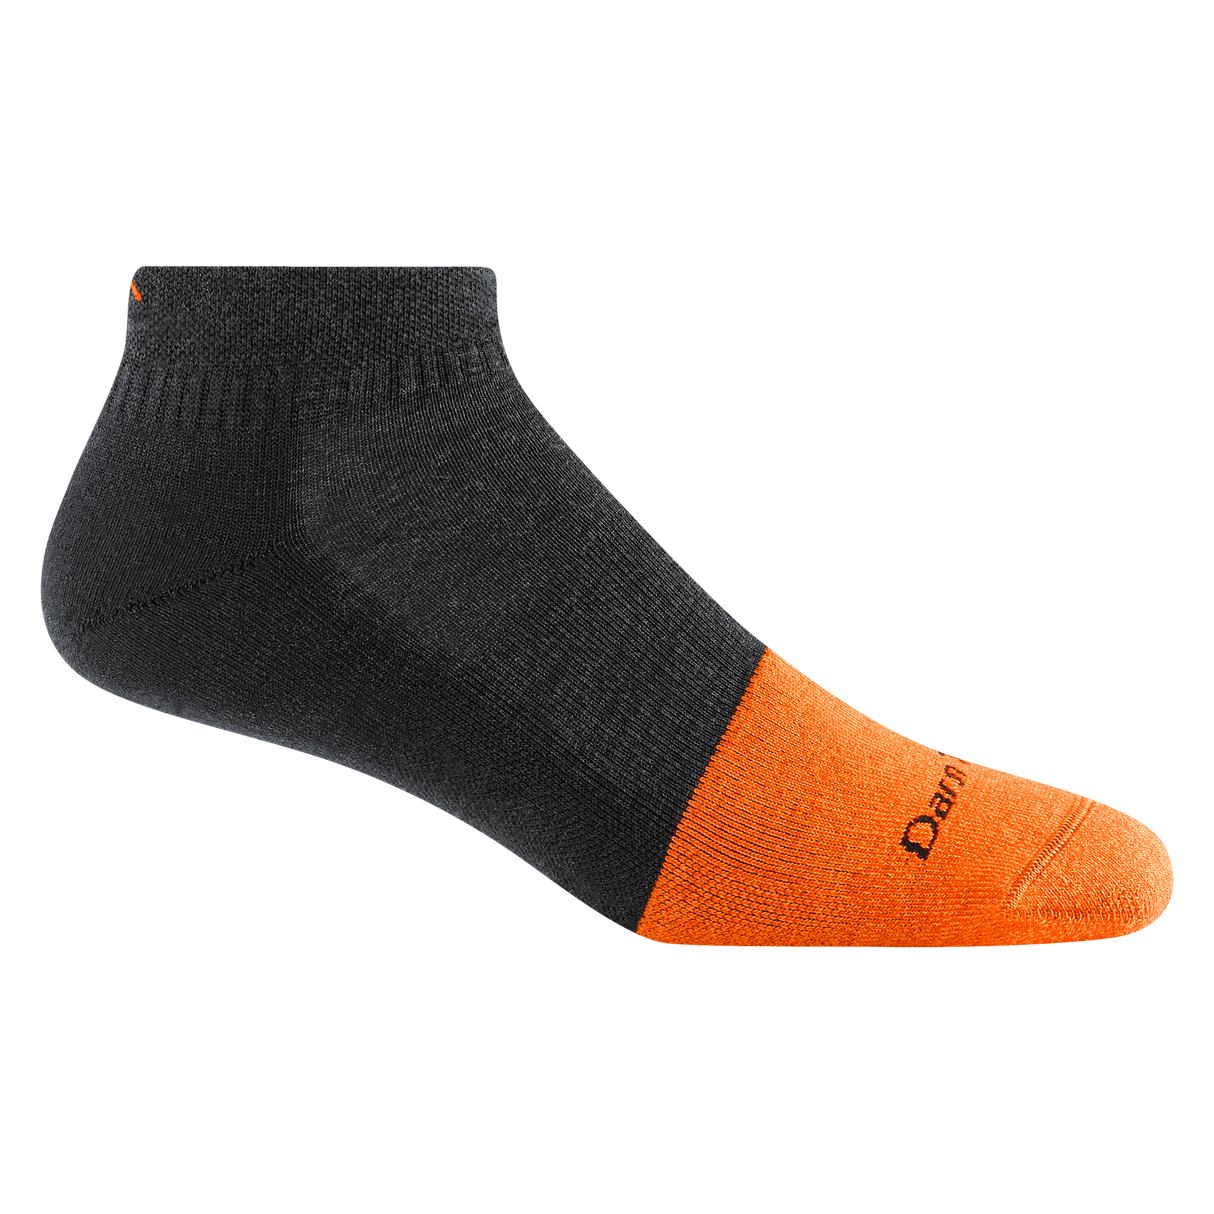 Darn Tough Mens Steely No Show Lightweight with Cushion and Full Cushion Toe Box Socks  -  Large / Graphite